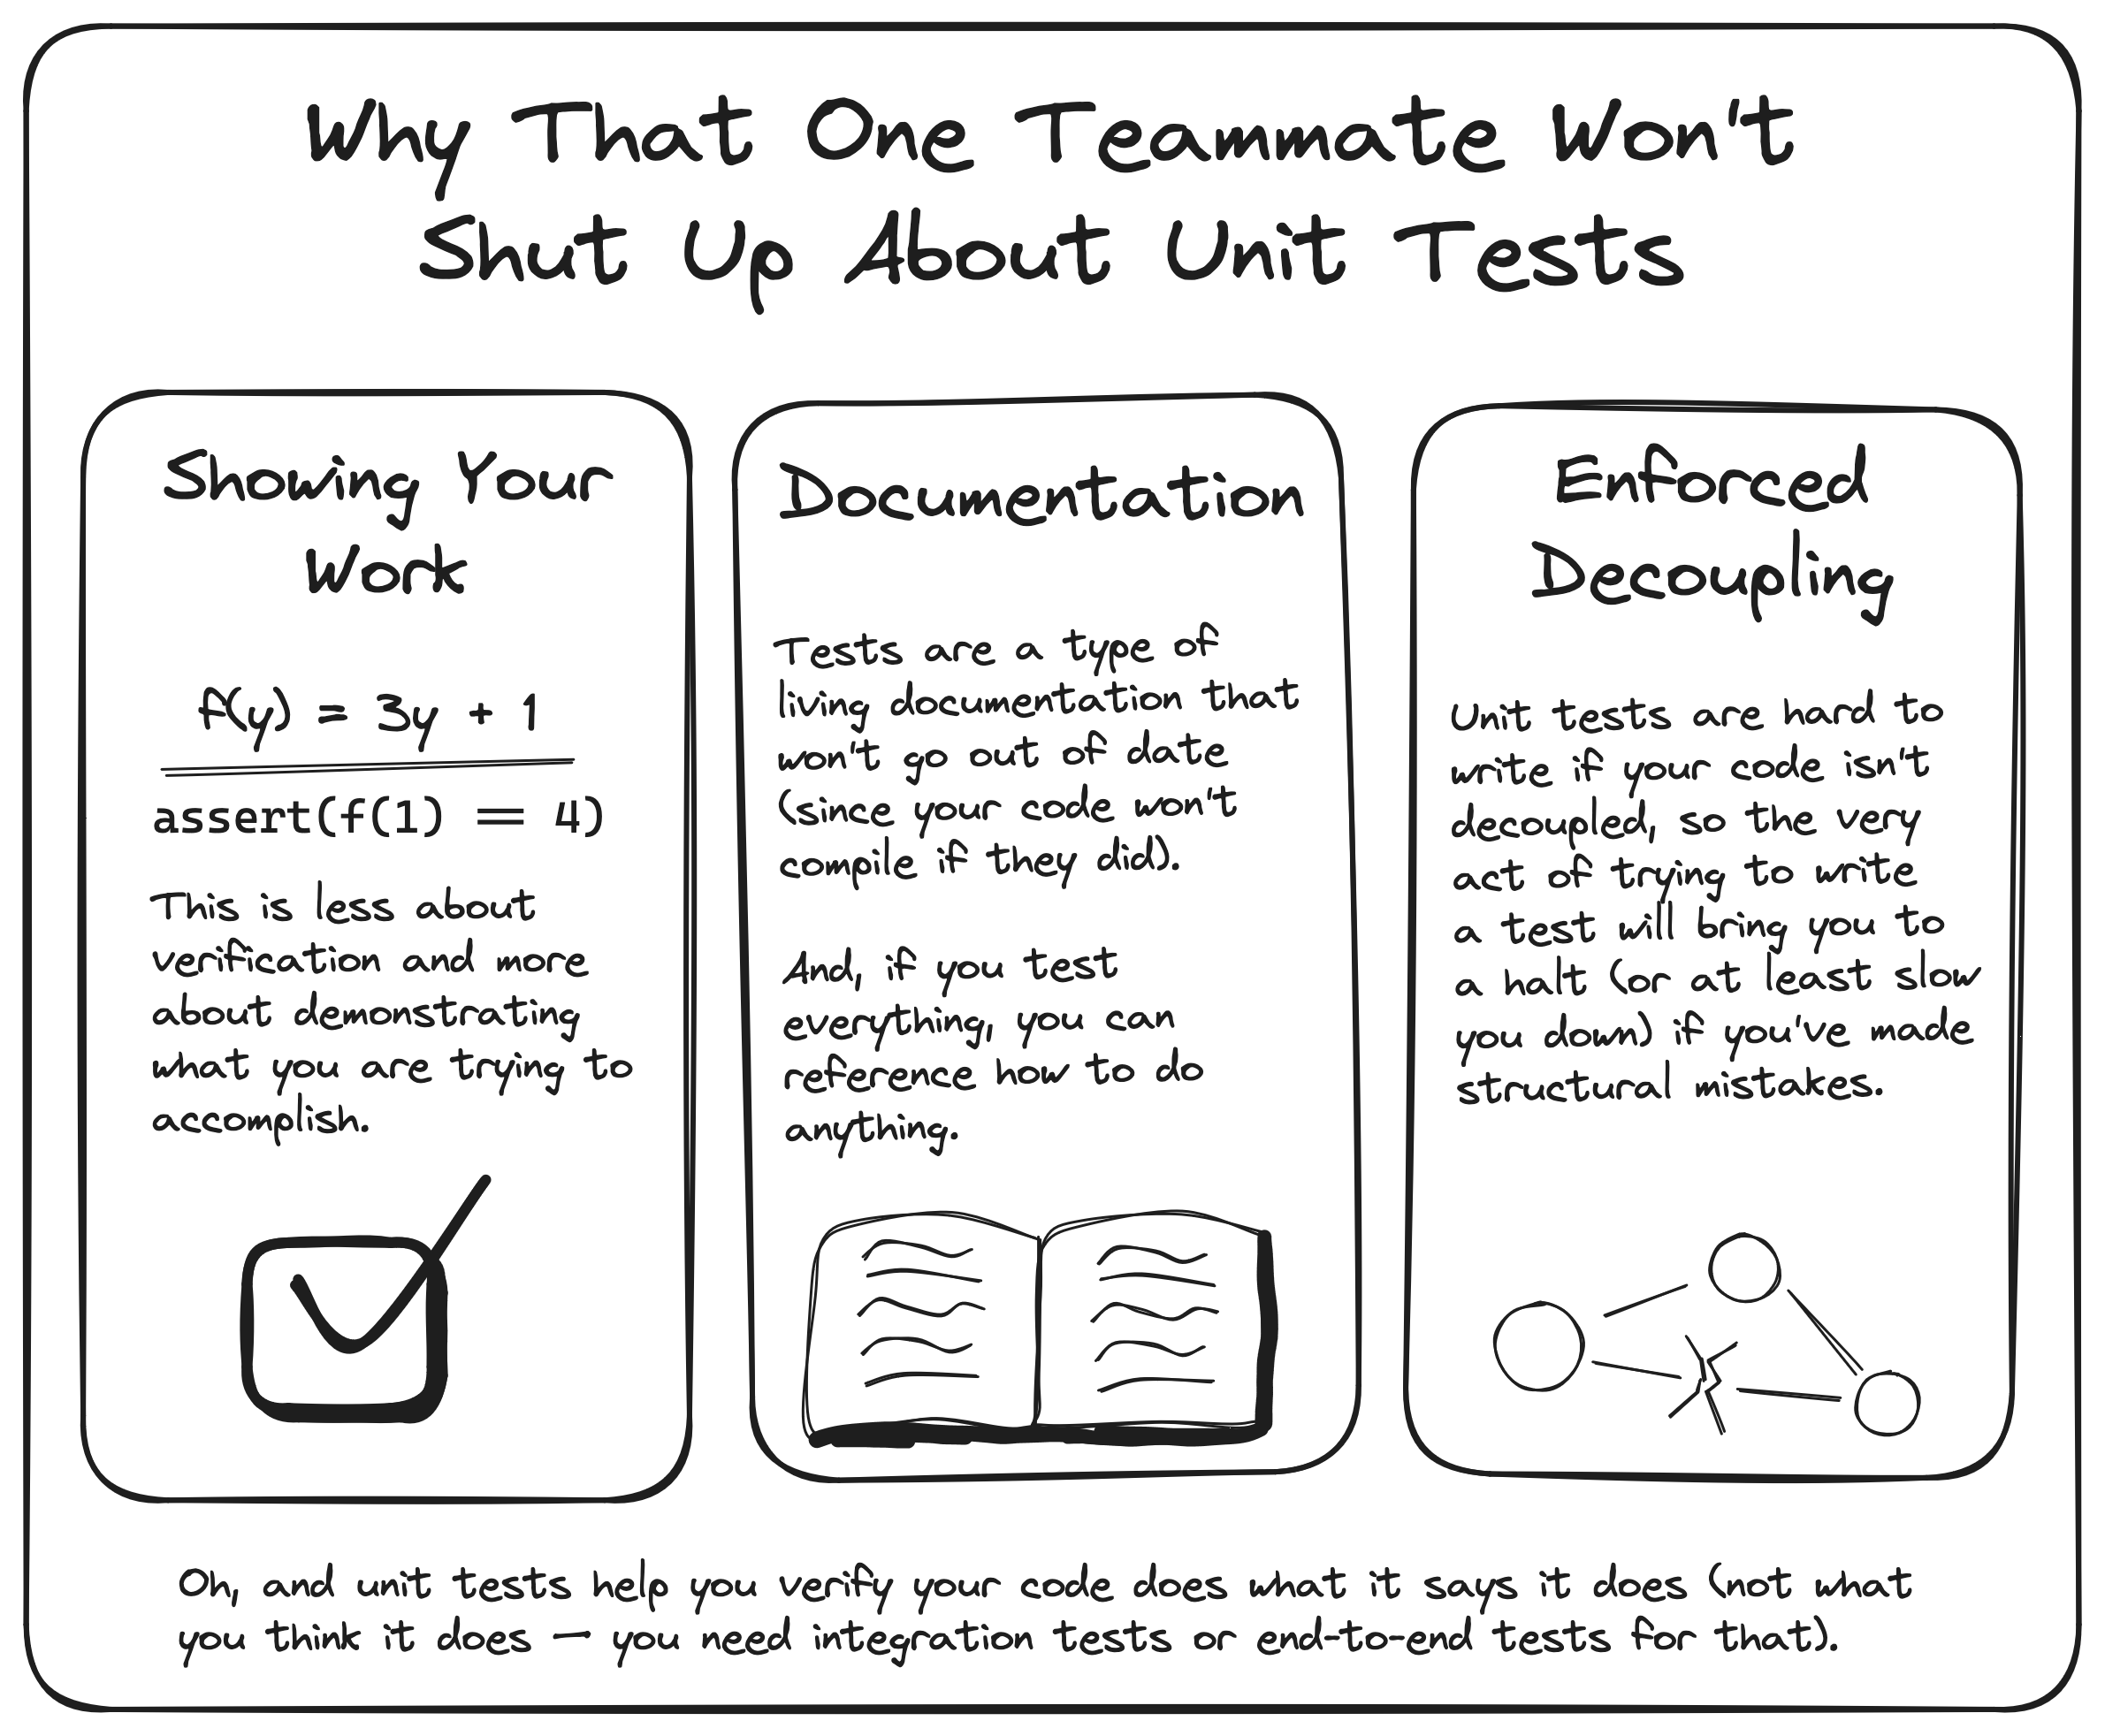 Why that one teammate won't shut up about unit tests